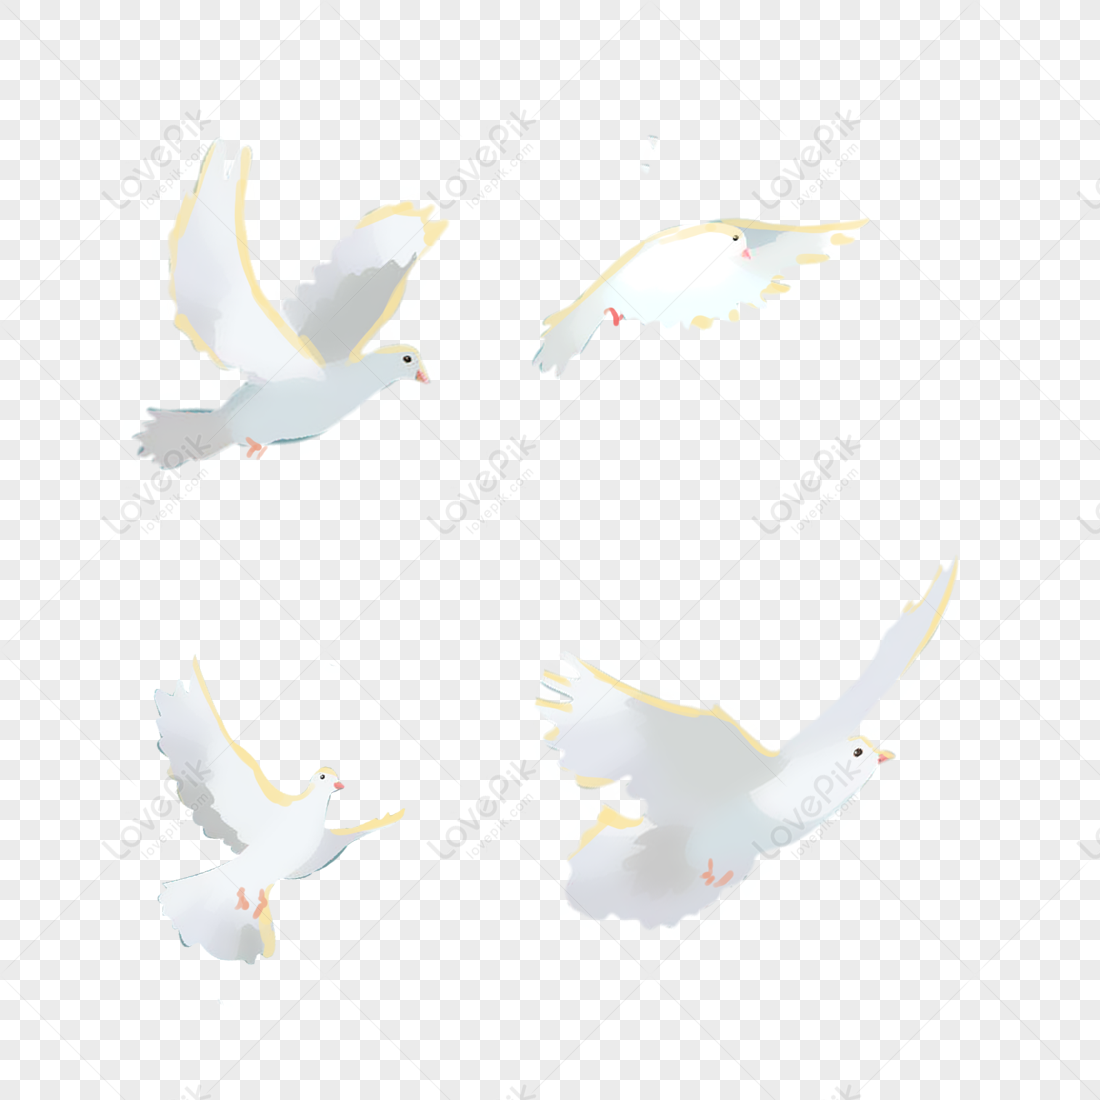 Dove PNG Transparent Background And Clipart Image For Free Download -  Lovepik | 400461980